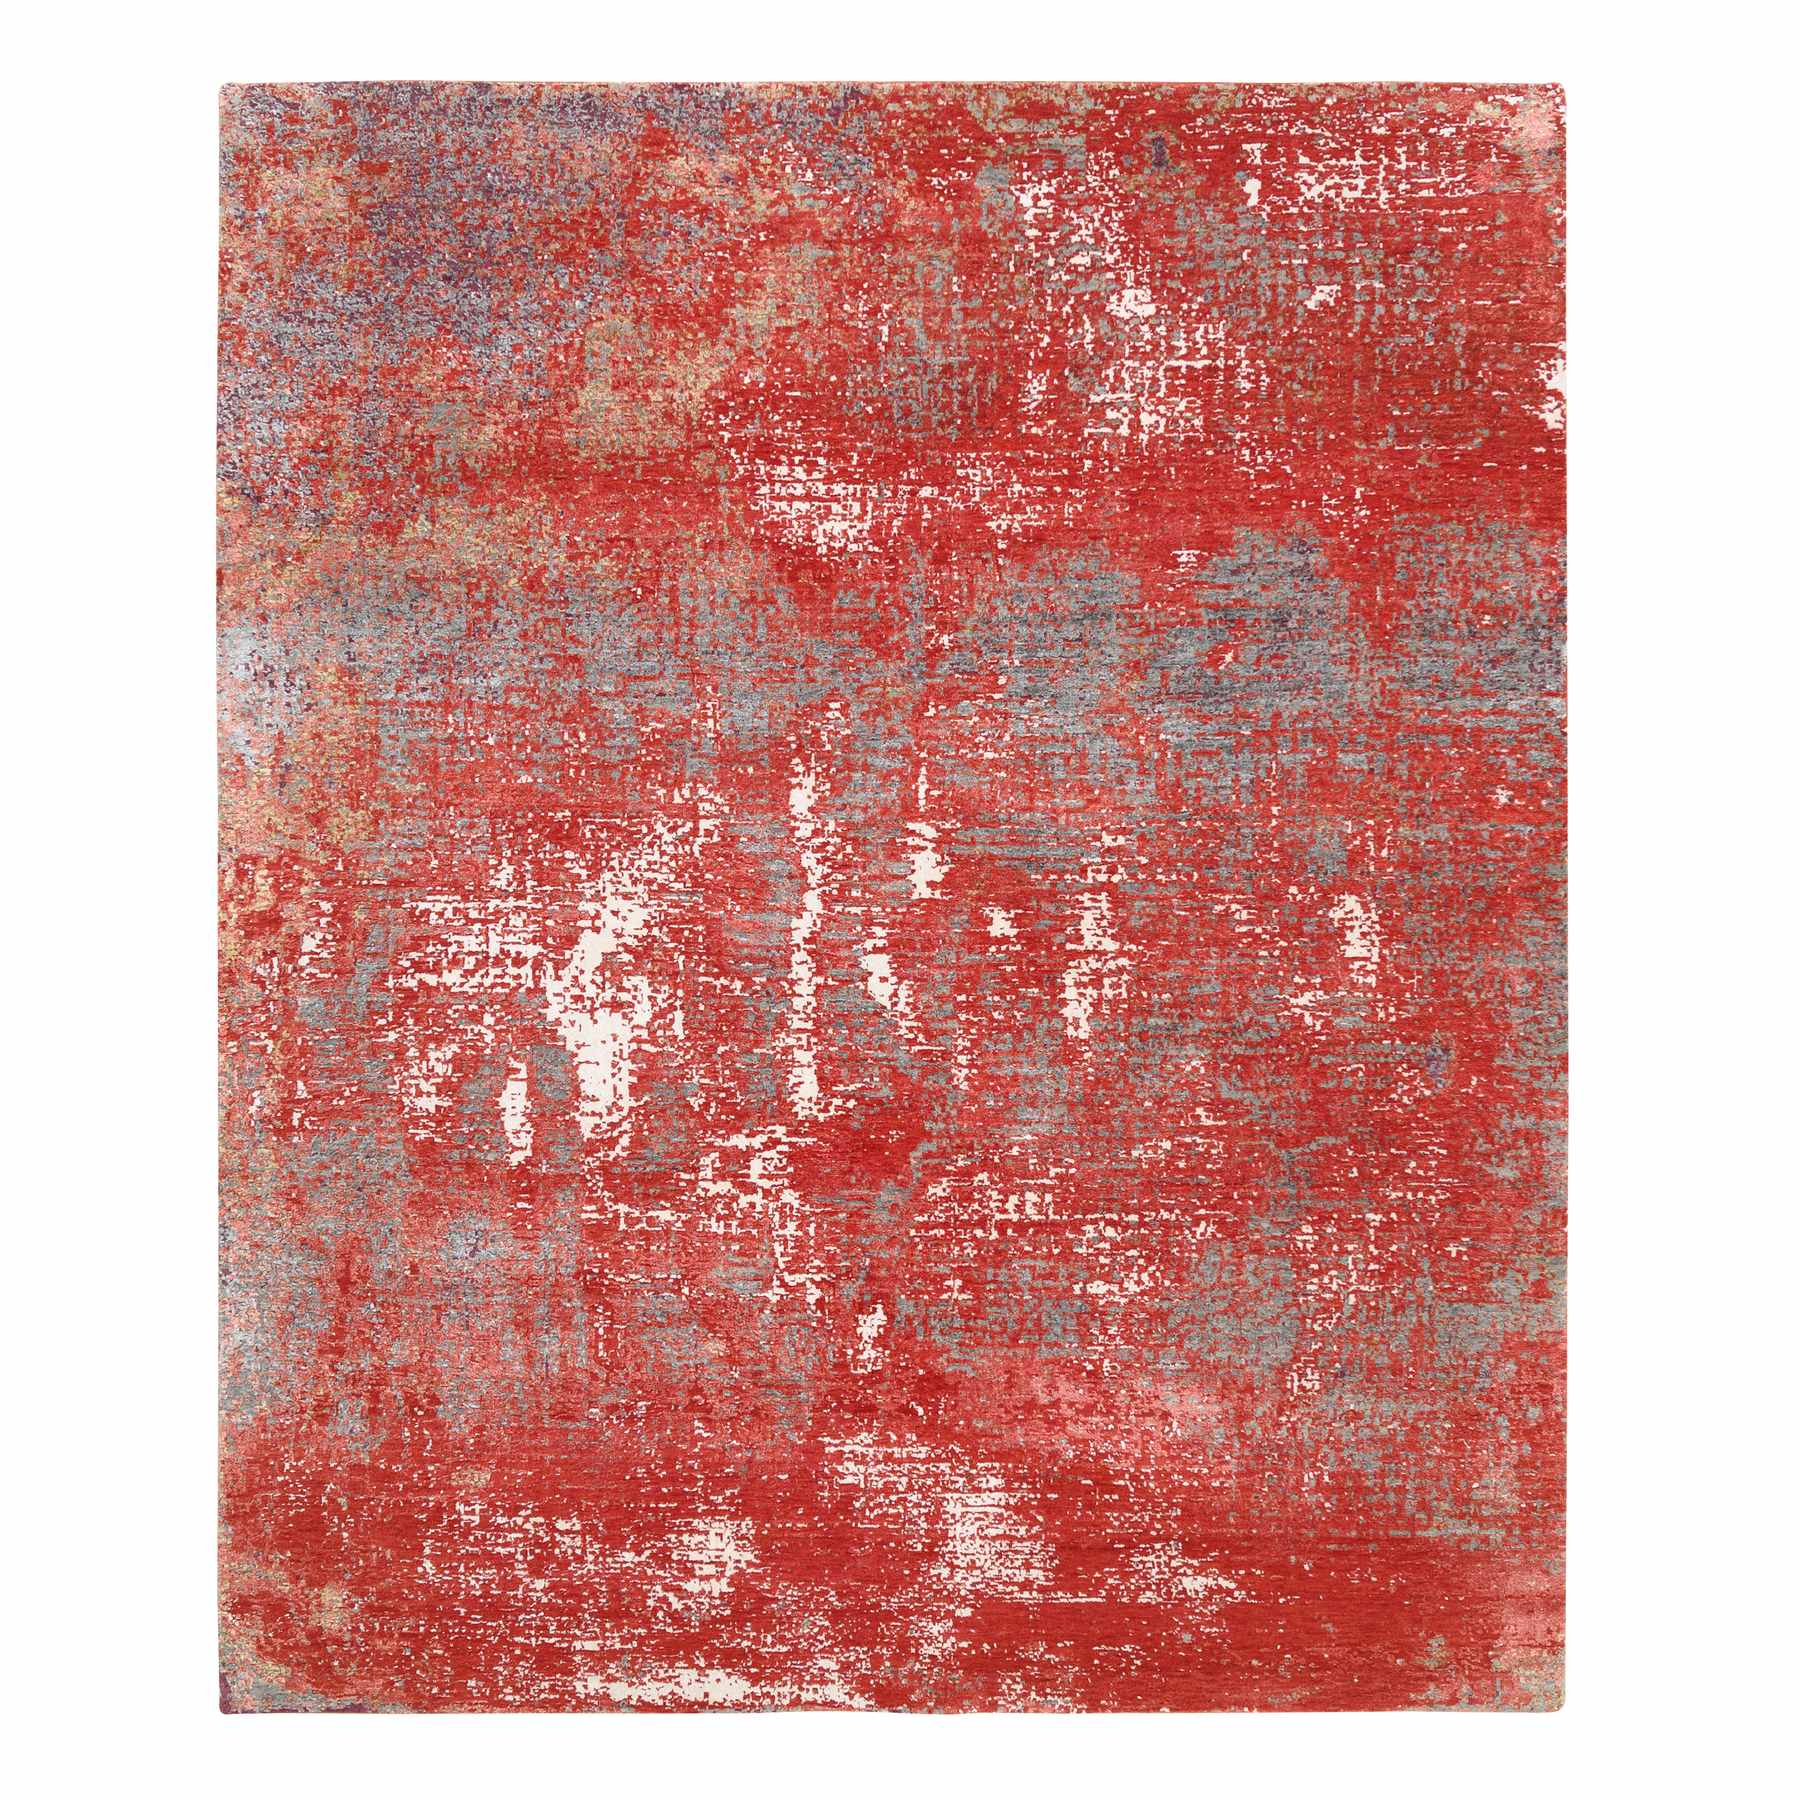 8'x10' Red, Modern Design, Nepale Weave, Wool and Silk, Hand Woven, Oriental Rug 